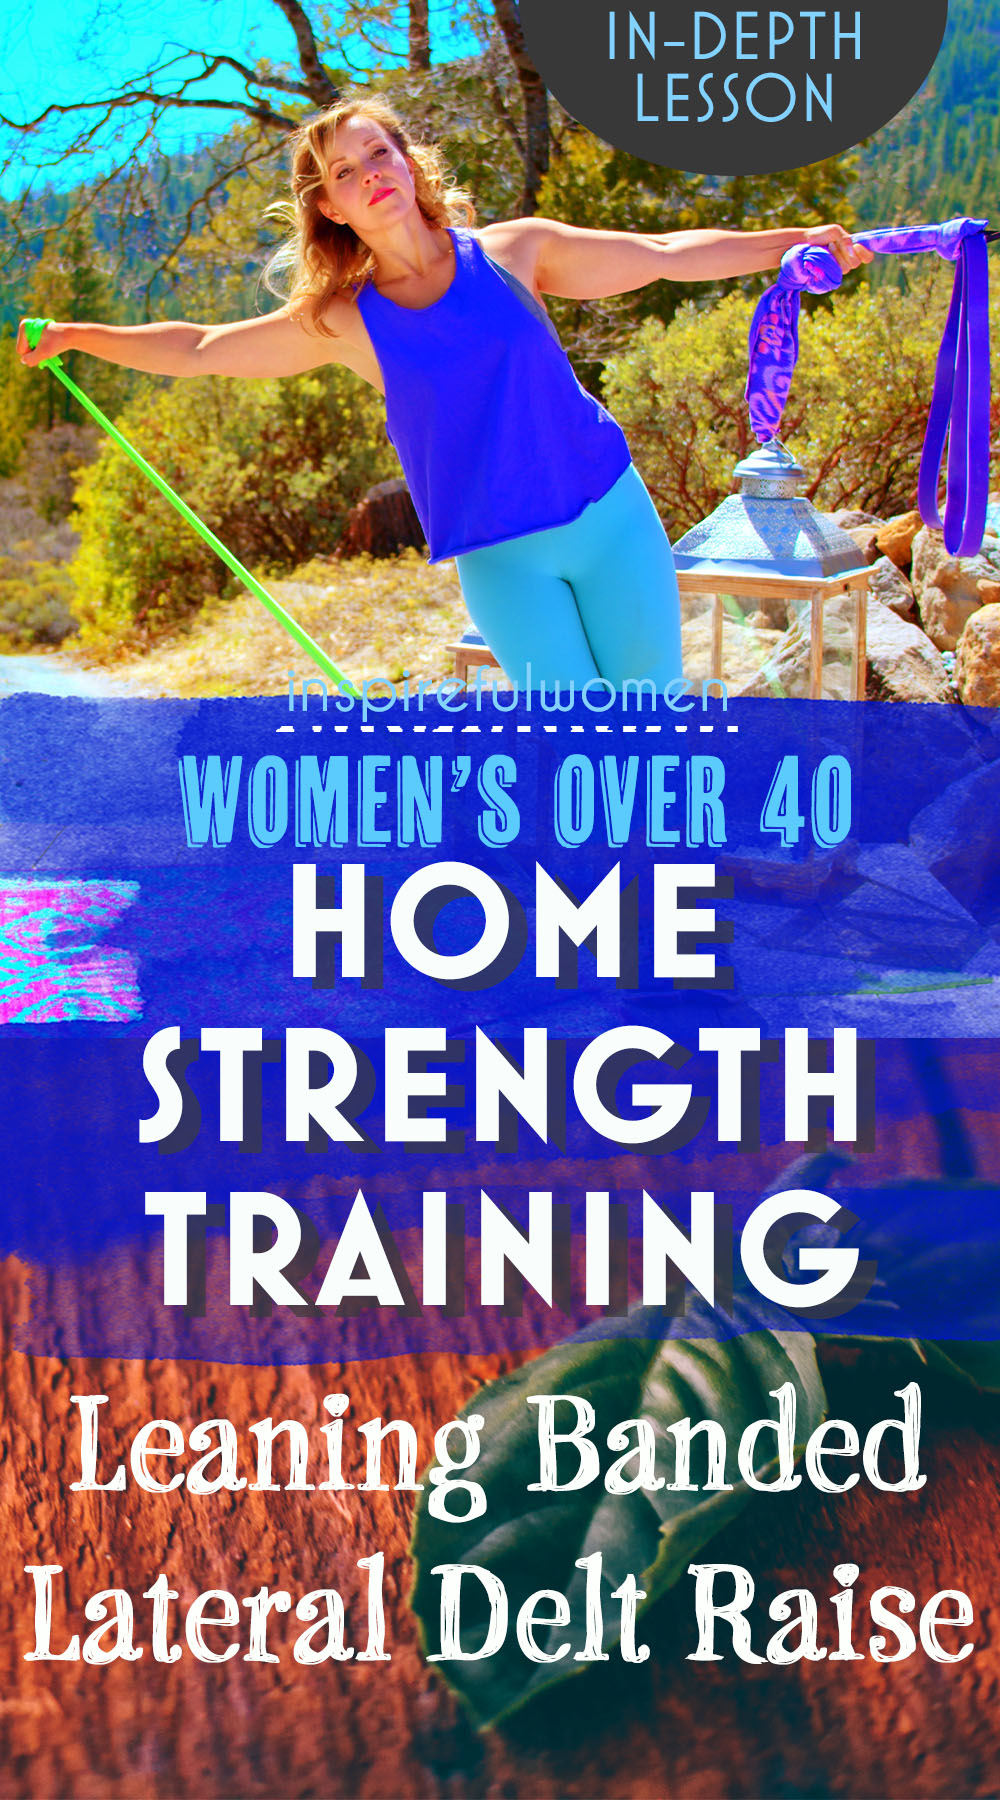 resistance-band-leaning-lateral-shoulder-raise-deltoid-exercise-at-home-for-women-